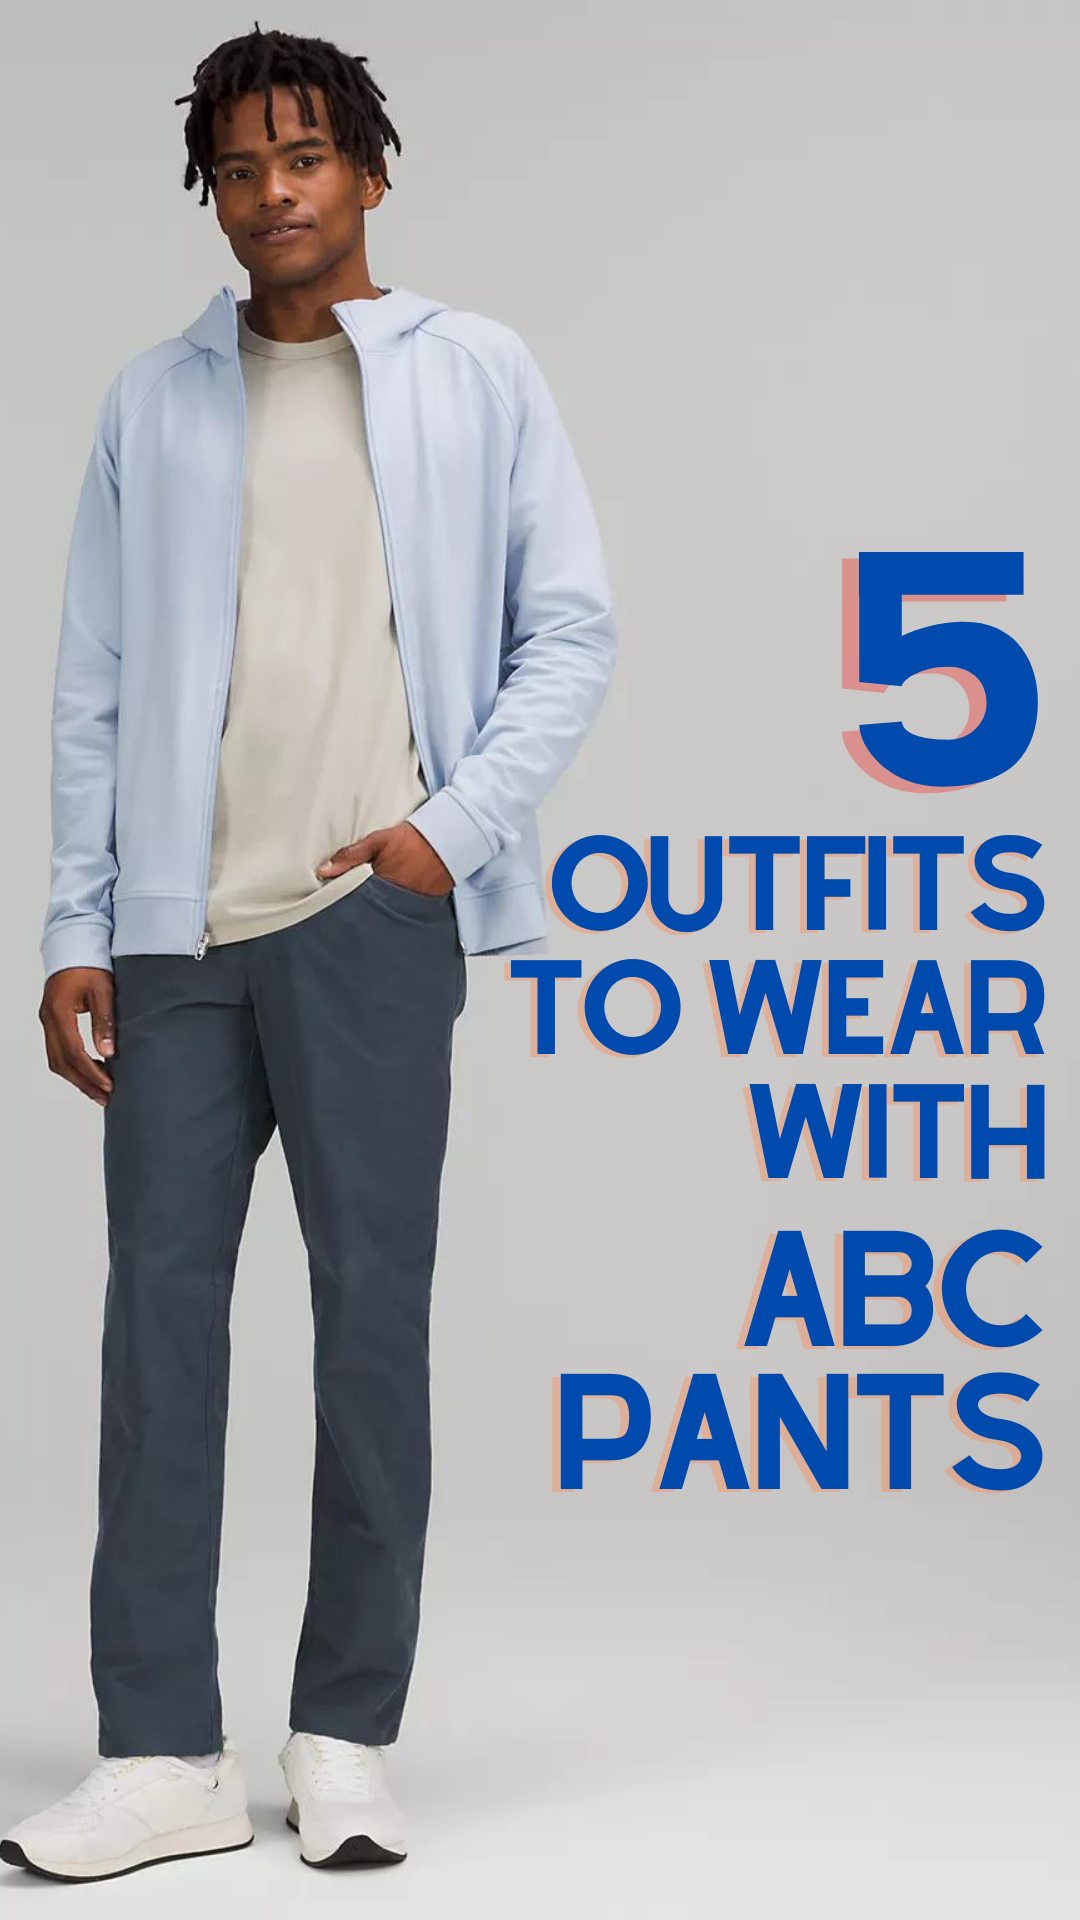 5 outfits to wear with abc pants